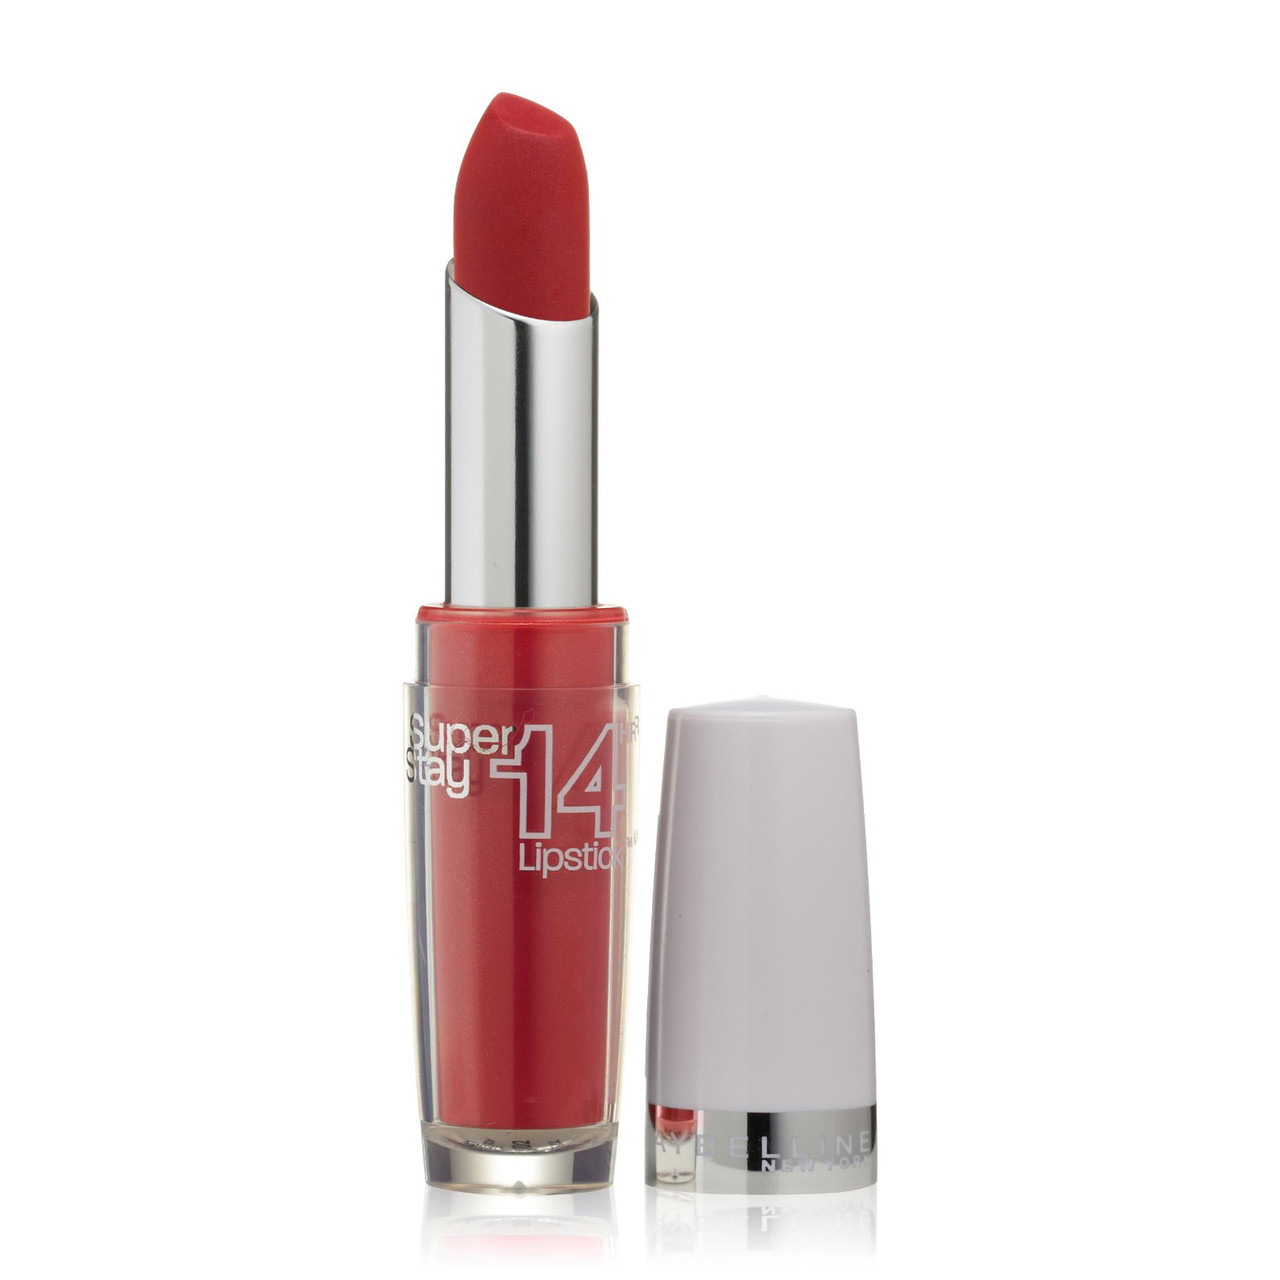 MAYBELLINE LIPSTICK Super Stay 24hr Dual Colour, NEW- CHOOSE YOUR SHADE